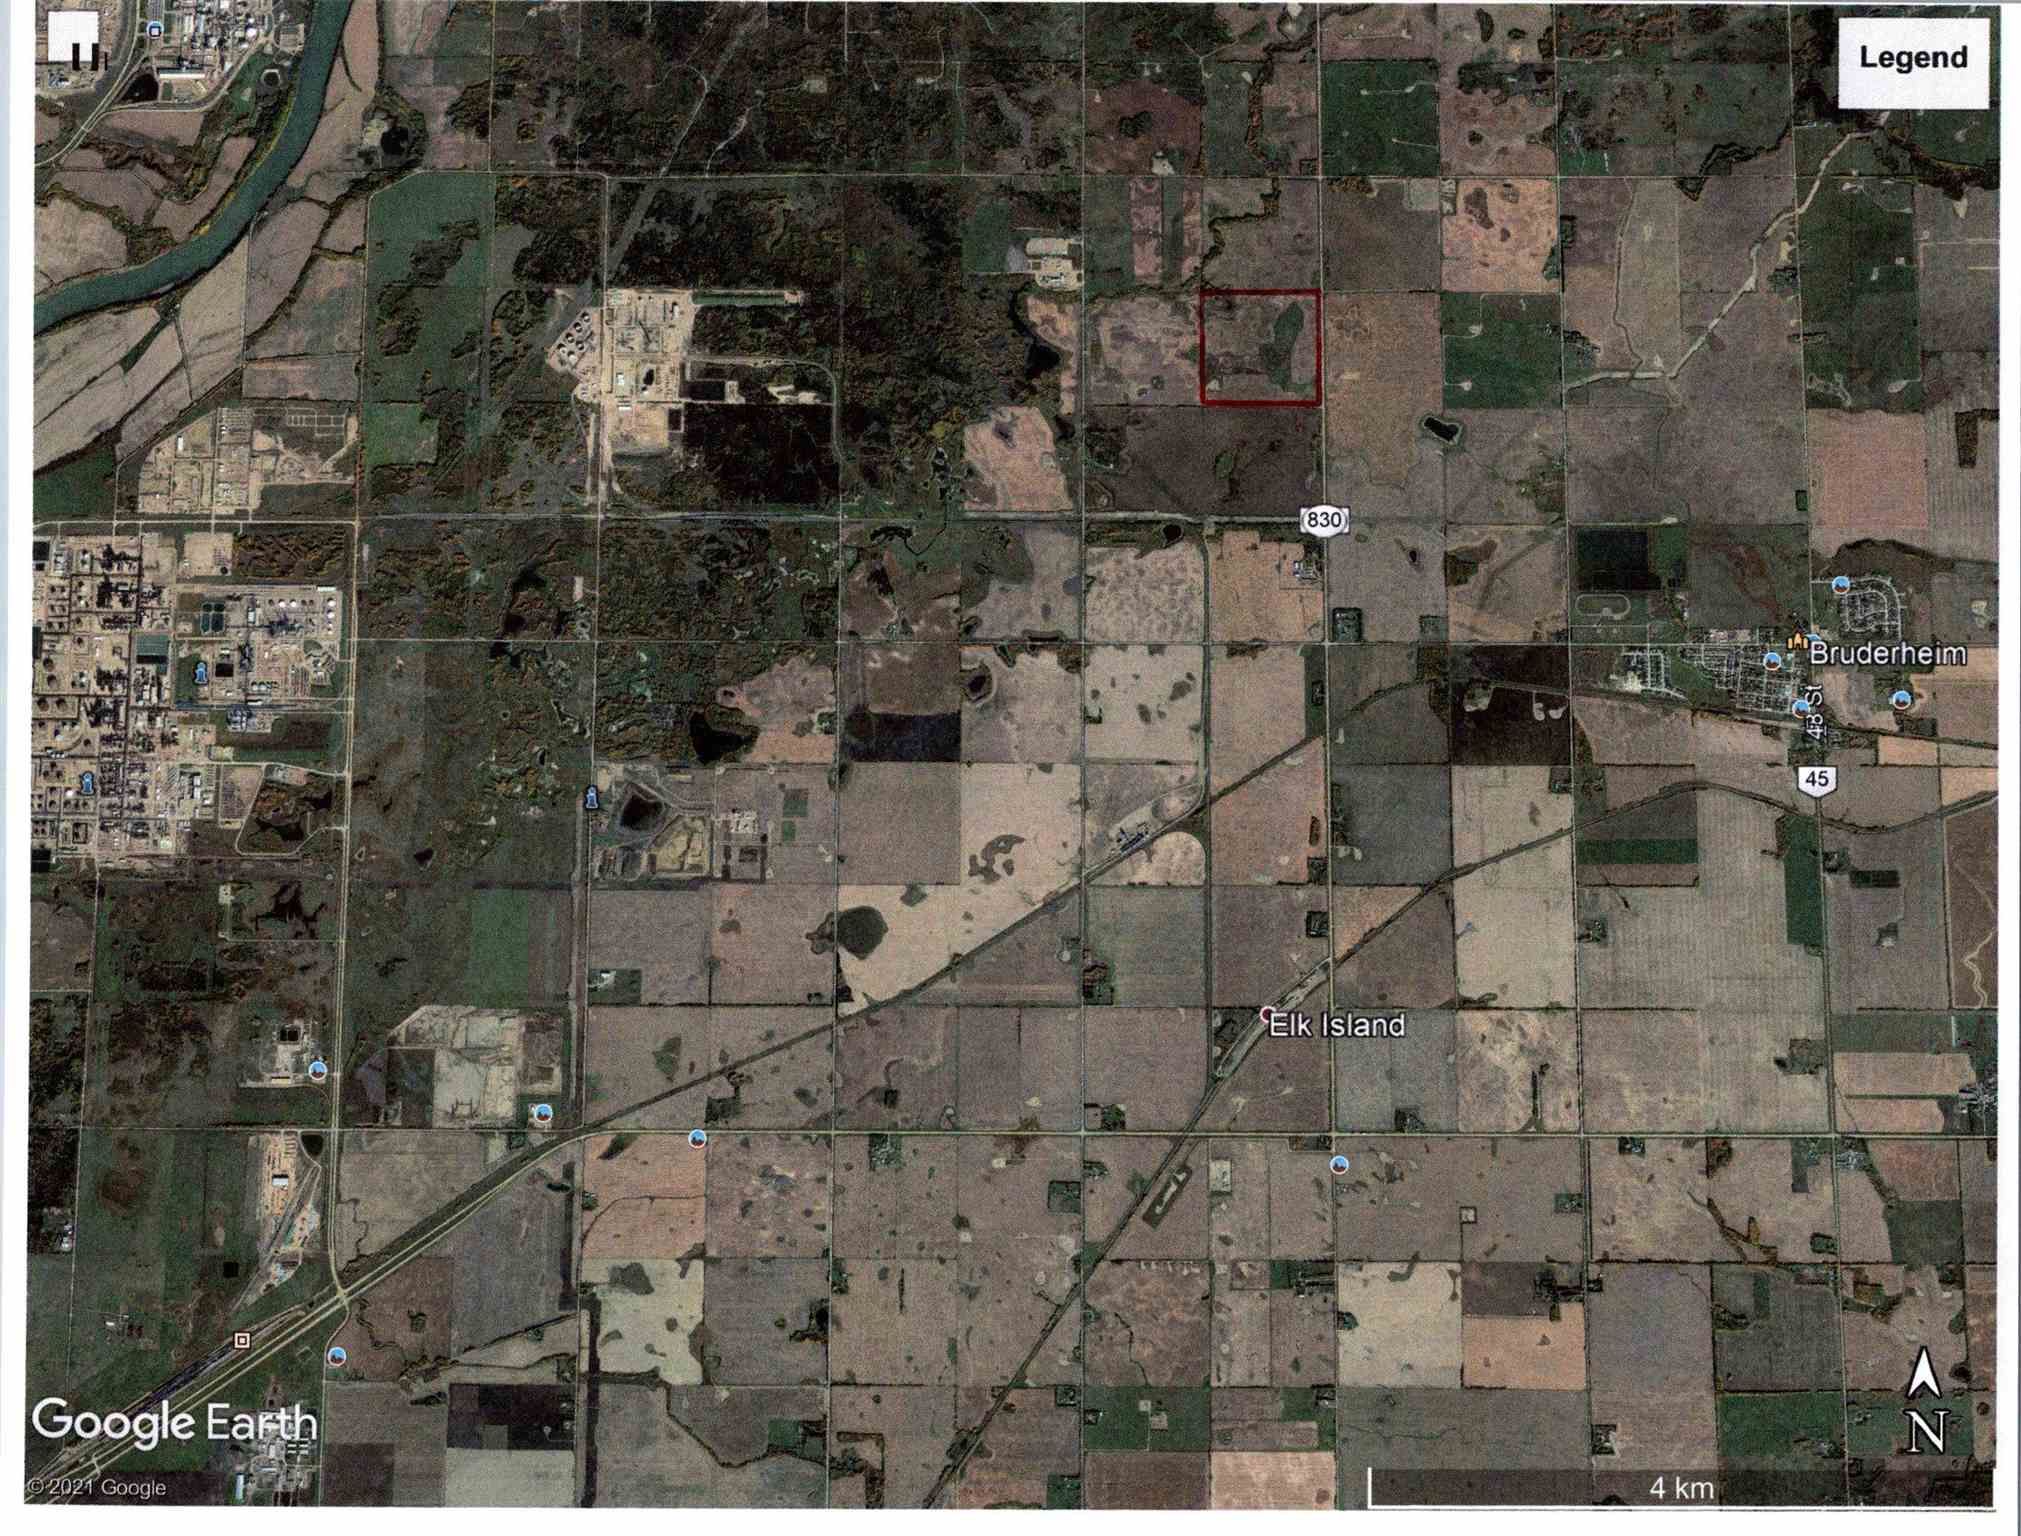 Main Photo: 56119 RGE RD 210 NW: Rural Strathcona County Vacant Lot/Land for sale : MLS®# E4249037